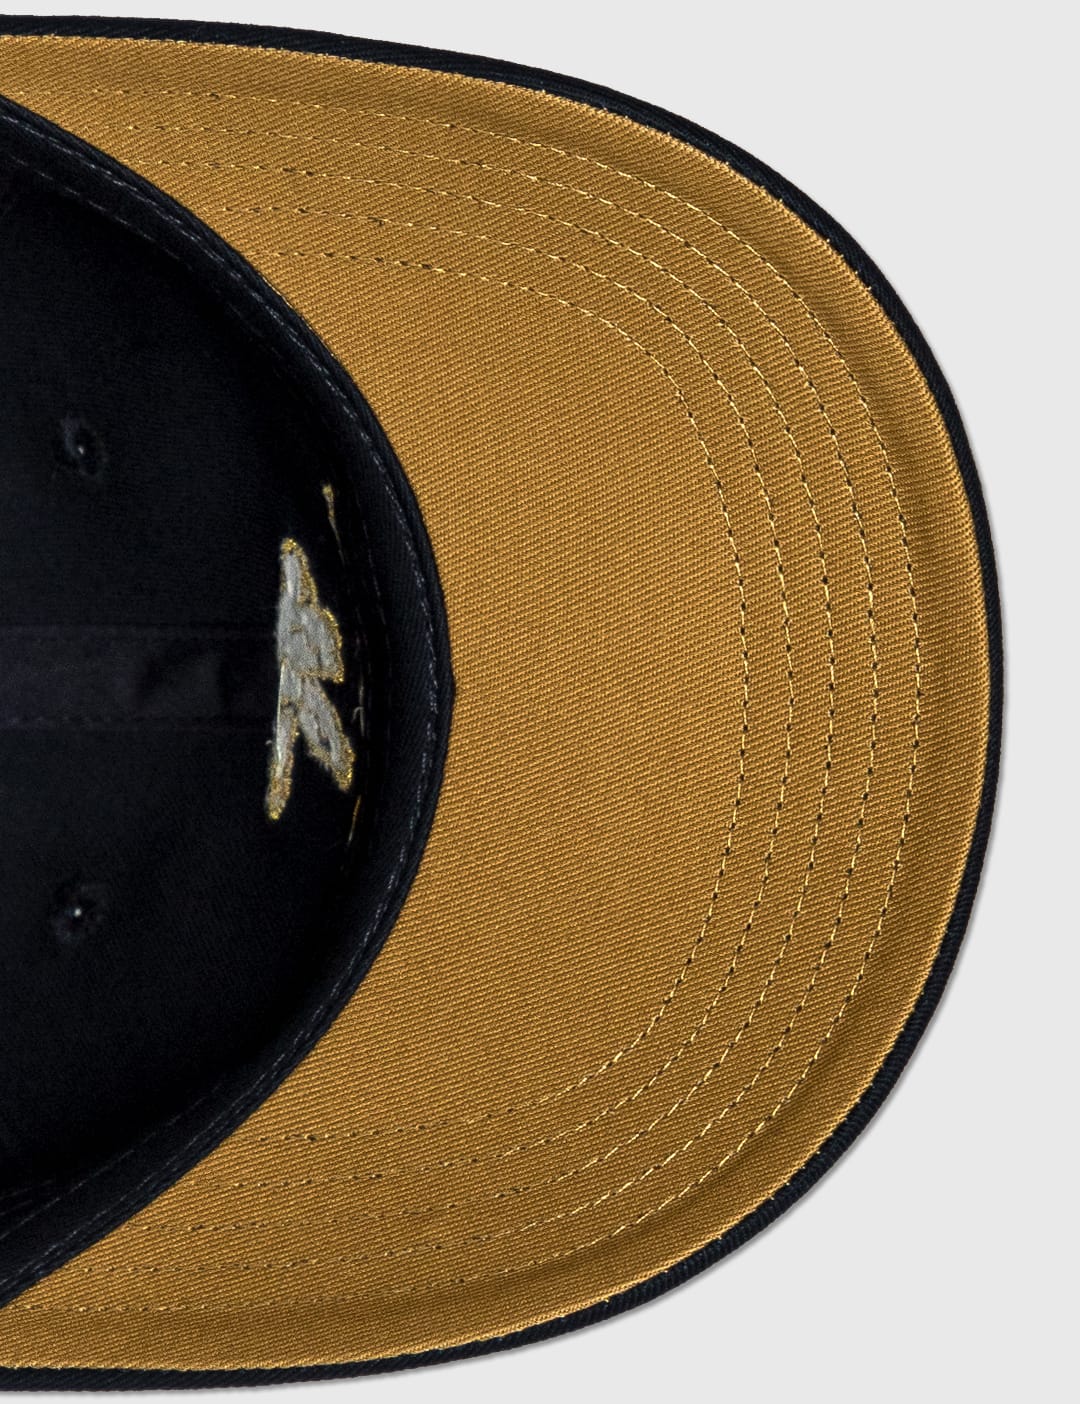 Human Made - 6 Panel Twill Cap #6 | HBX - Globally Curated Fashion 